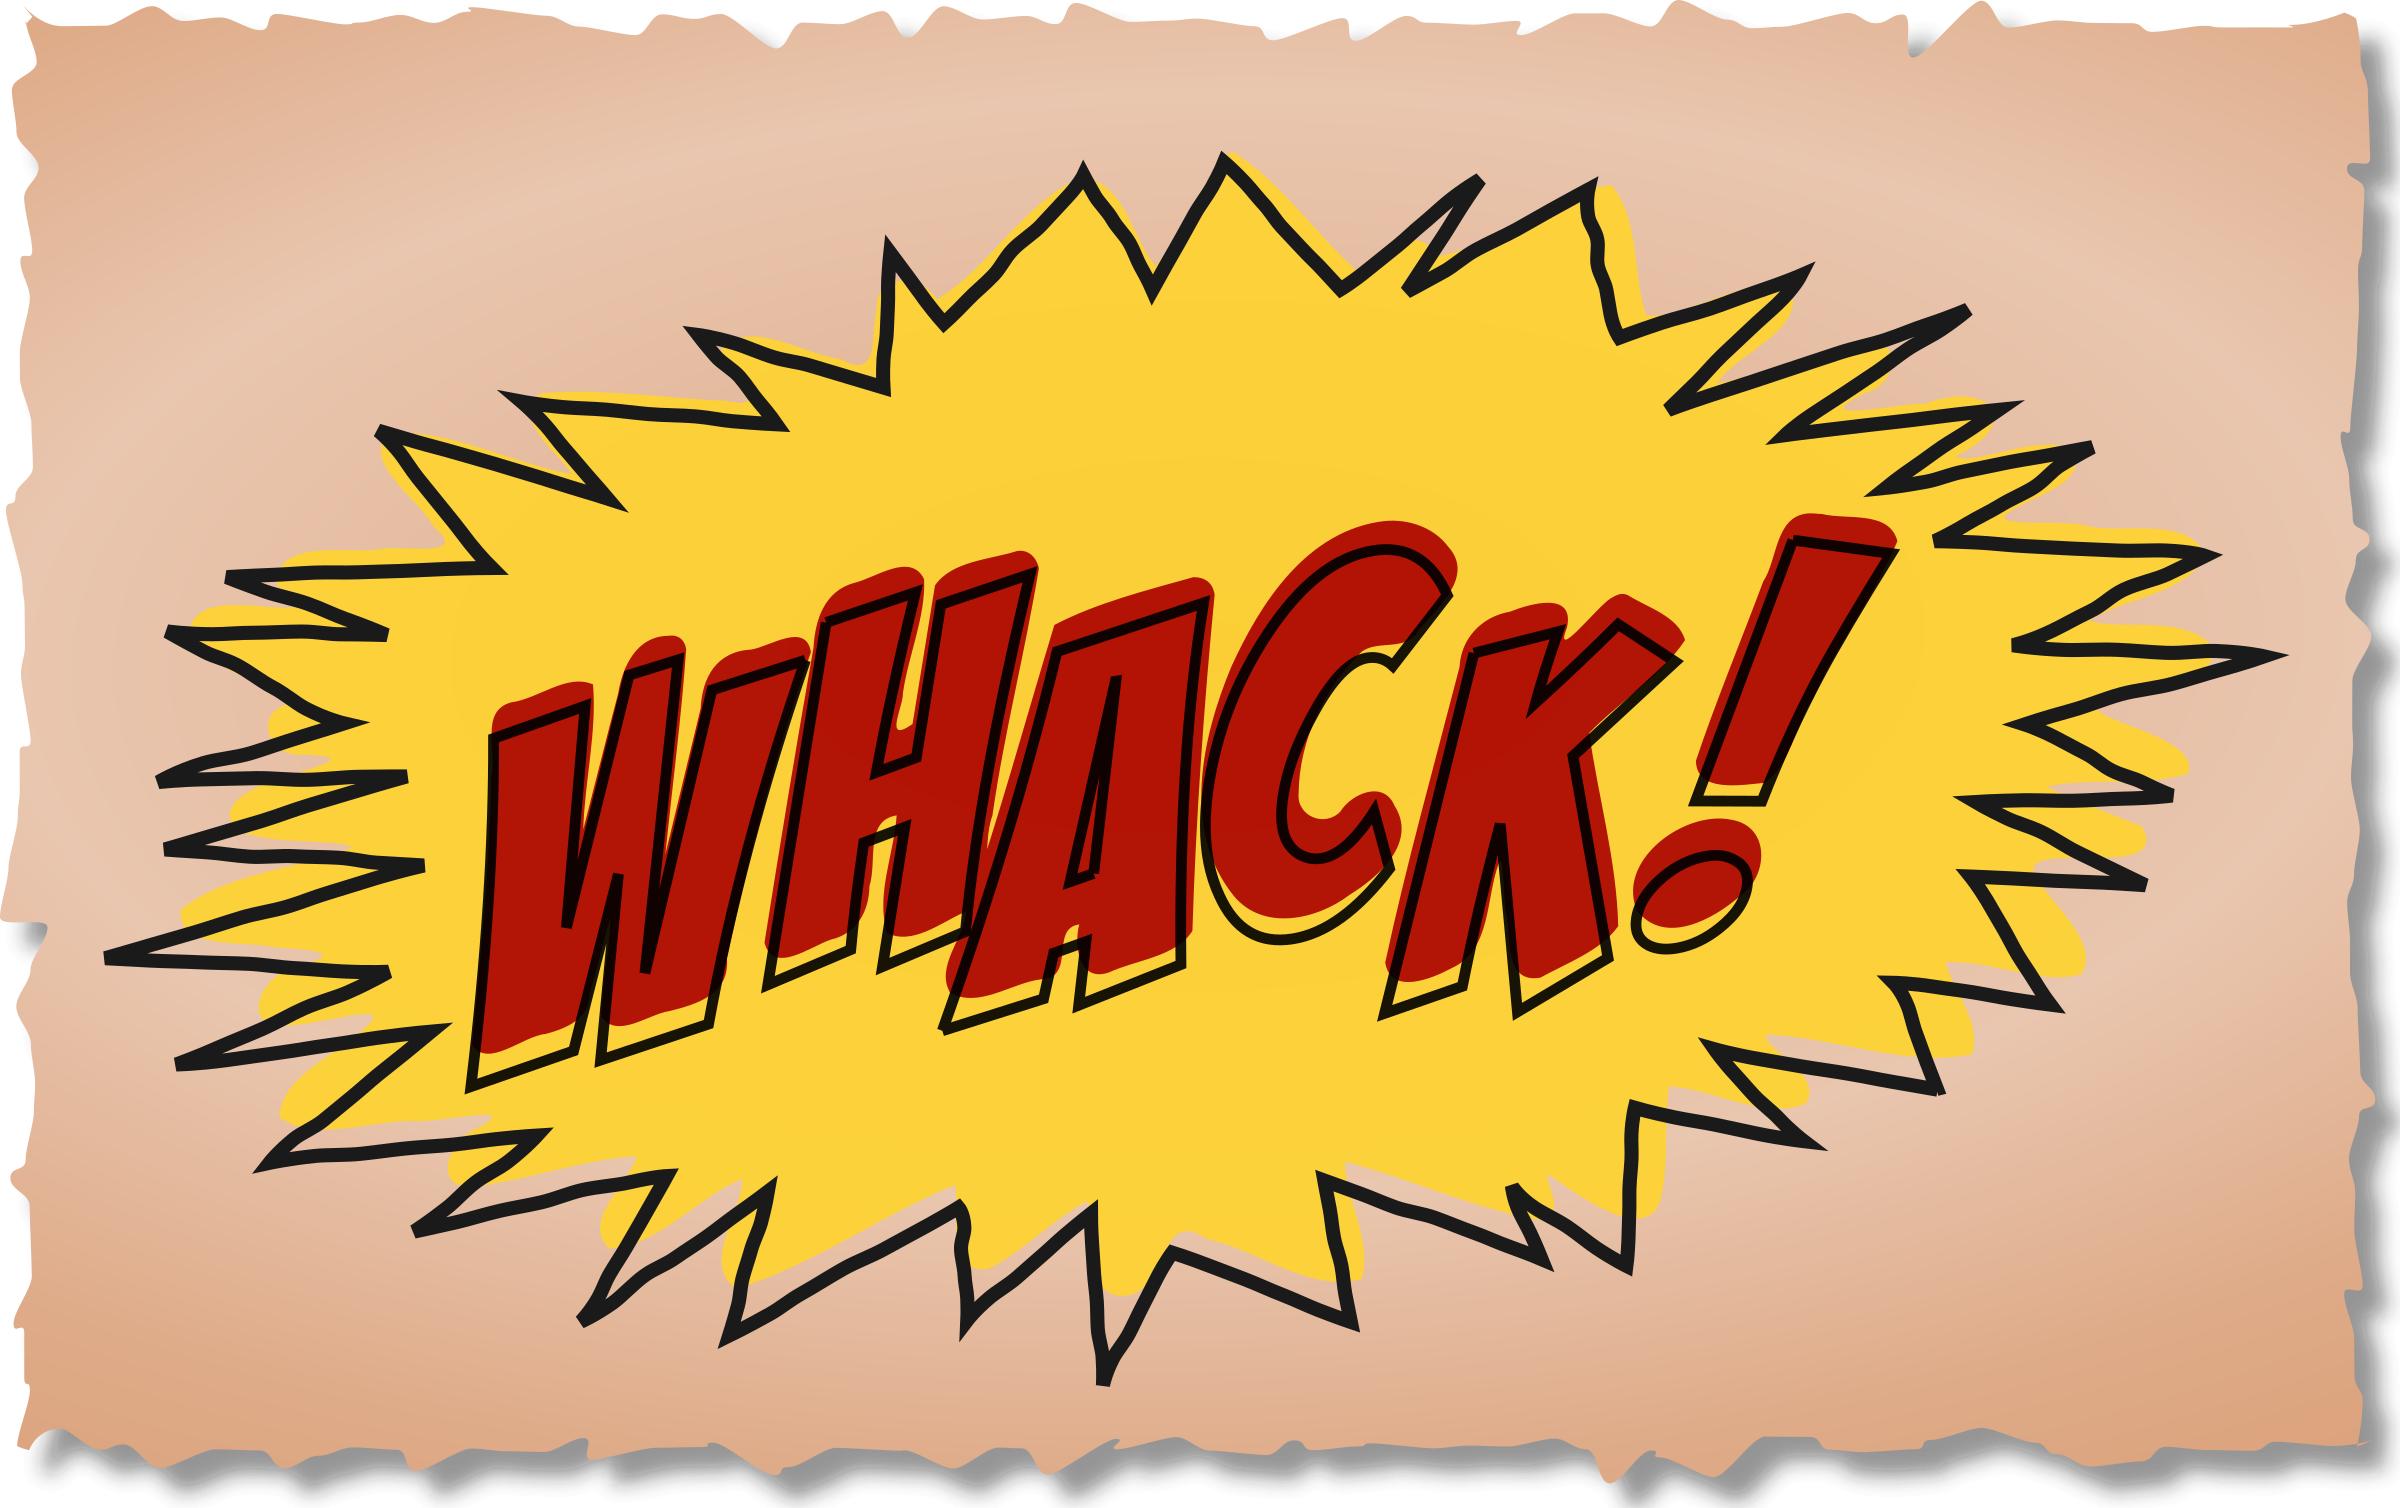 Whack comic book sound effect png